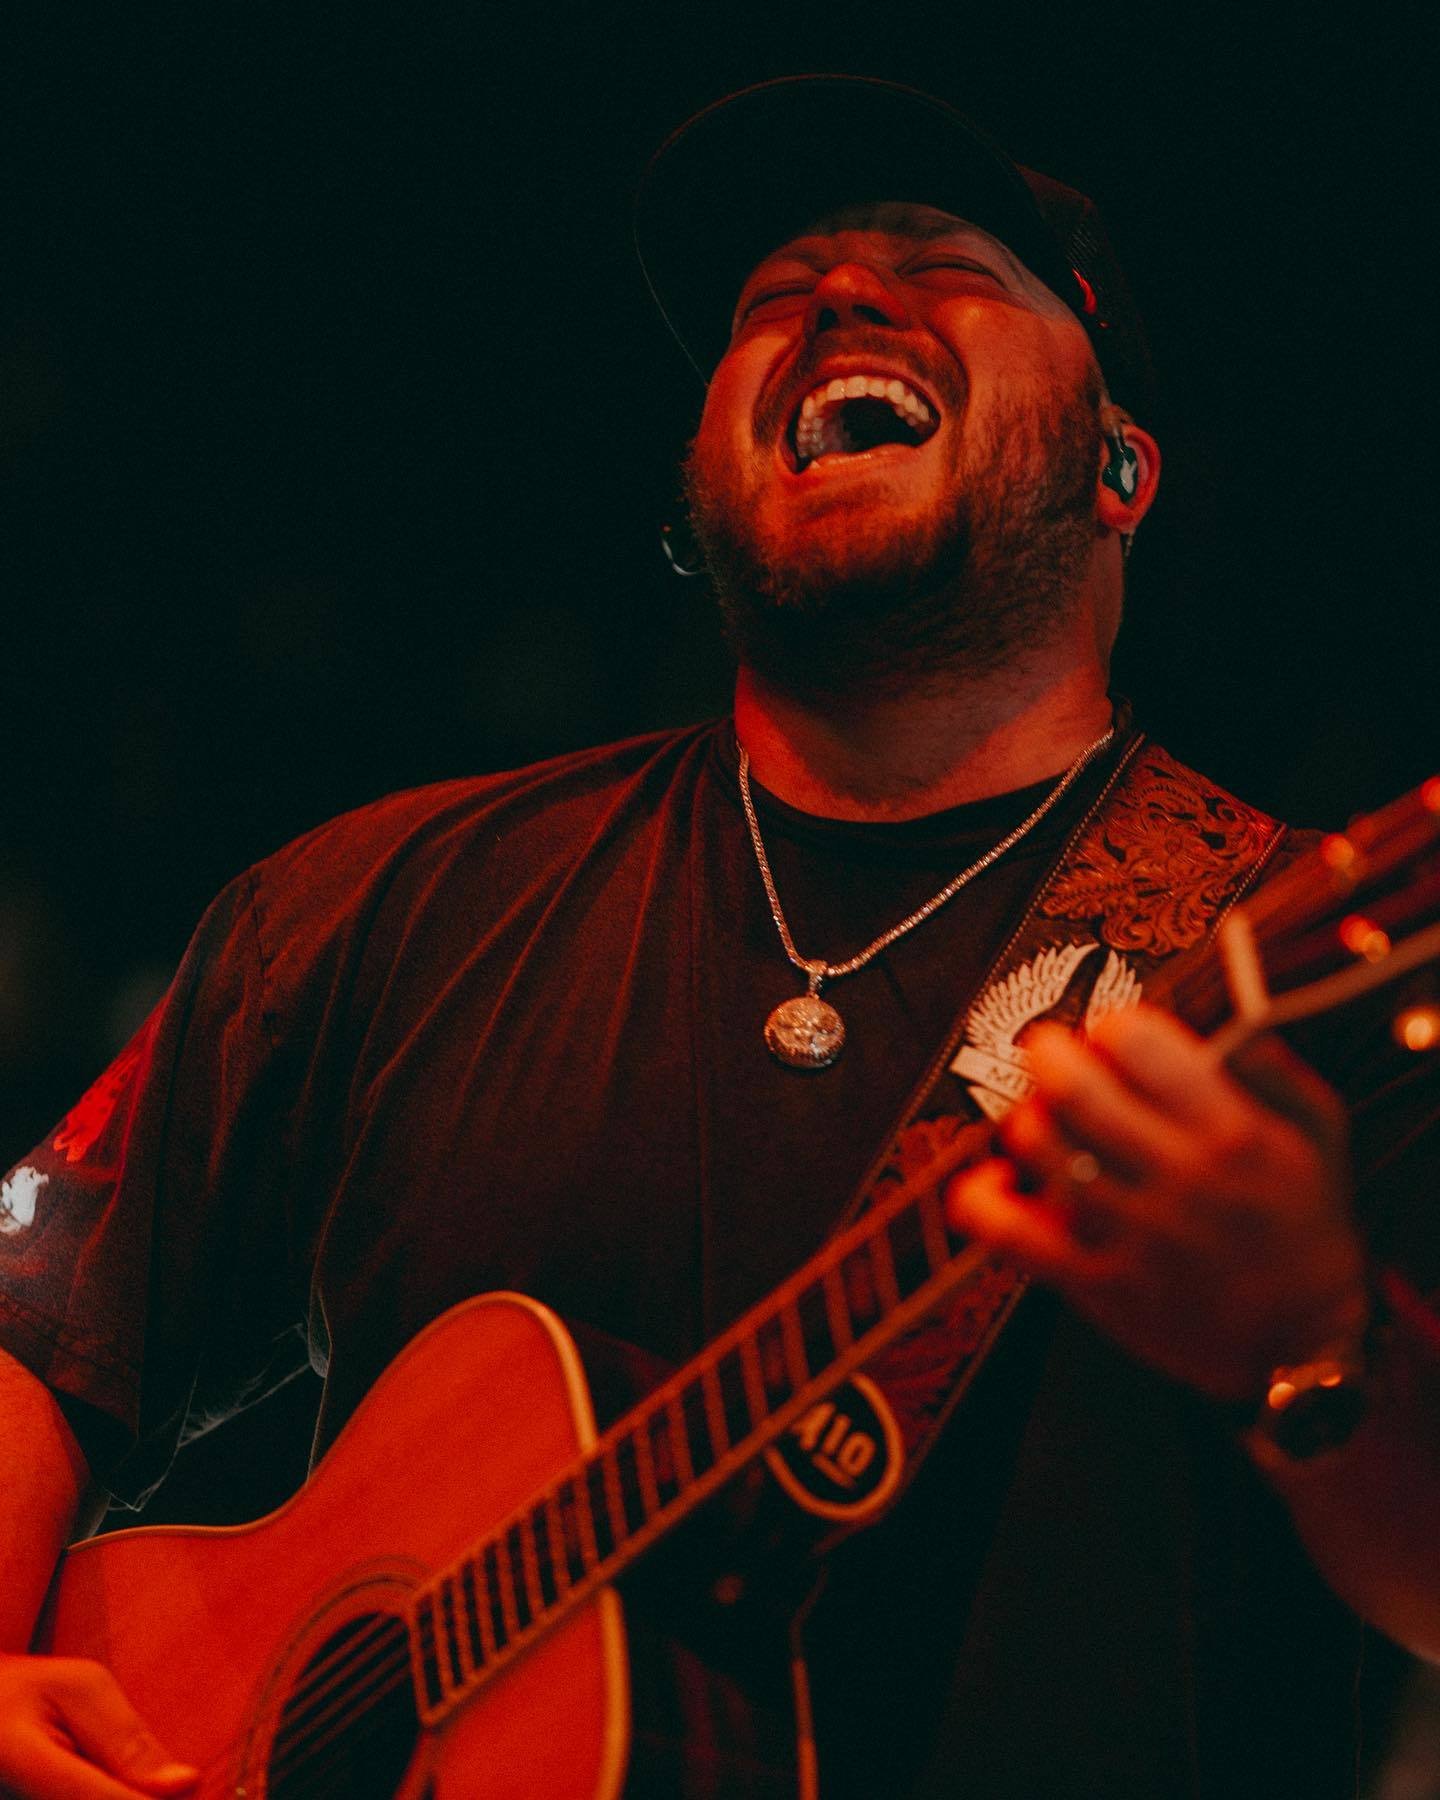 Mitchell Tenpenny and Meghan Patrick